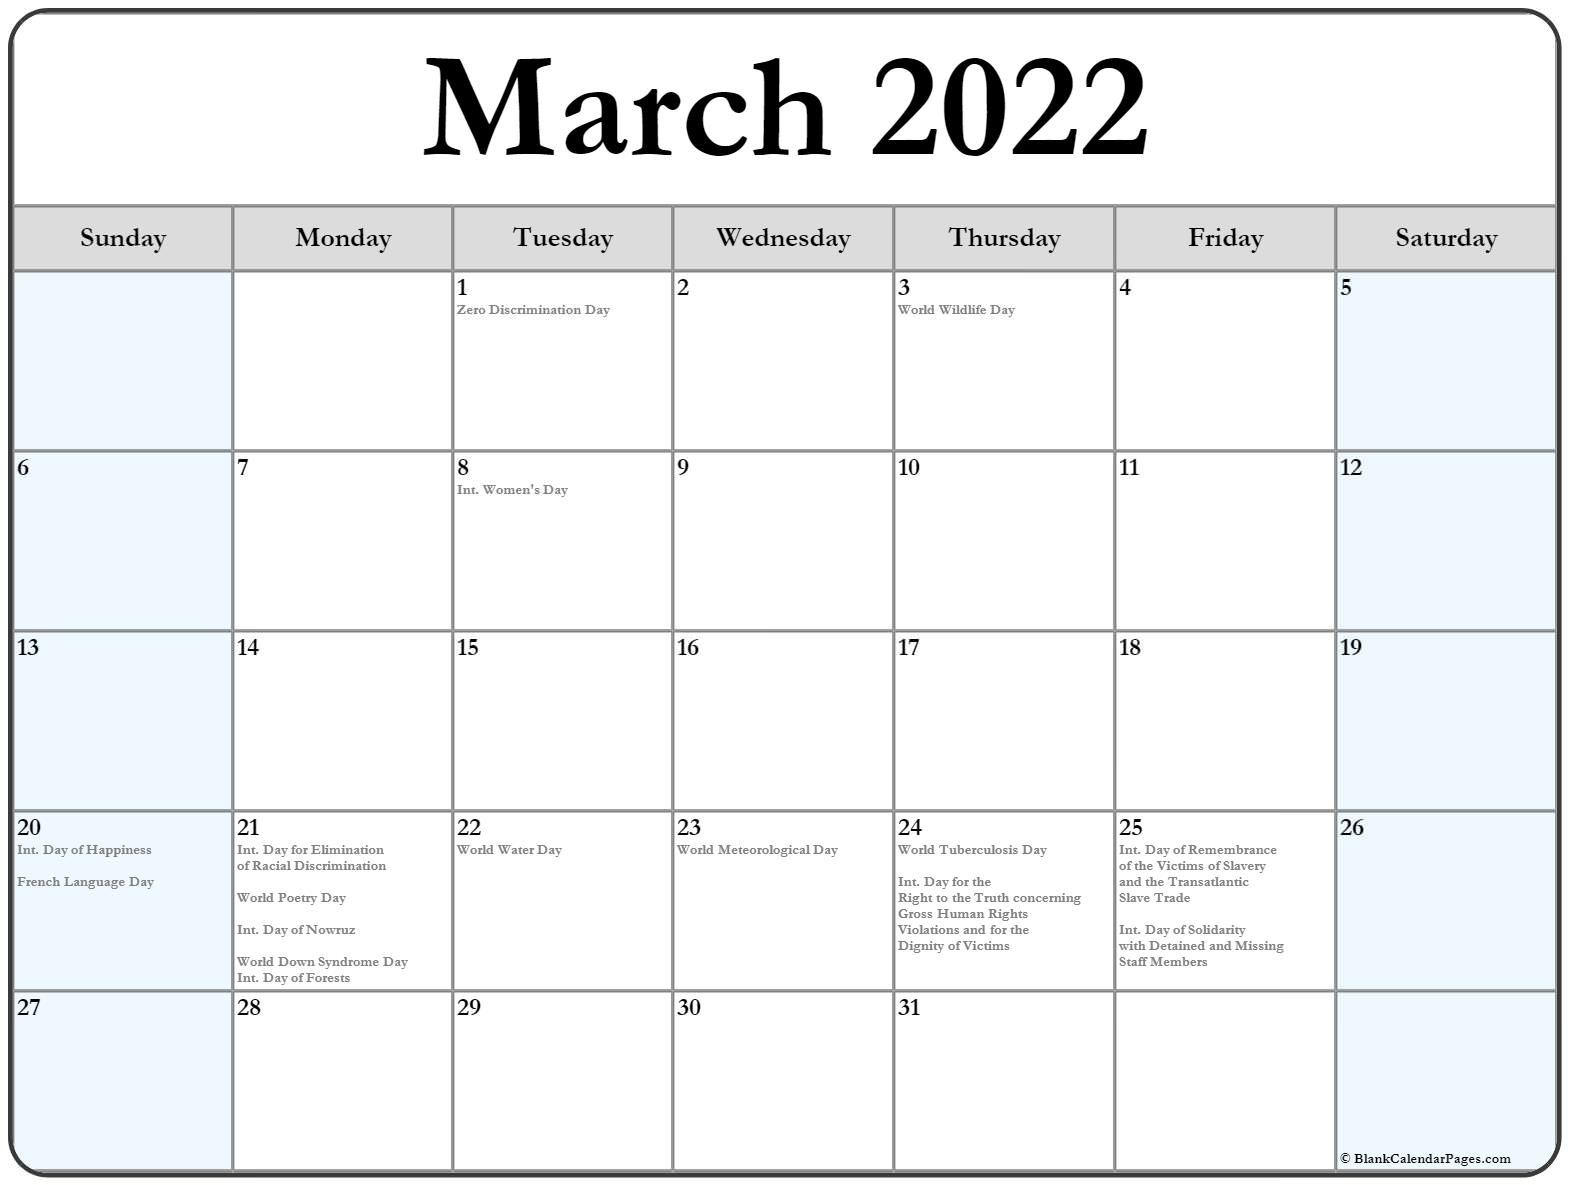 March And April 2022 Calendar With Holidays - Latest News